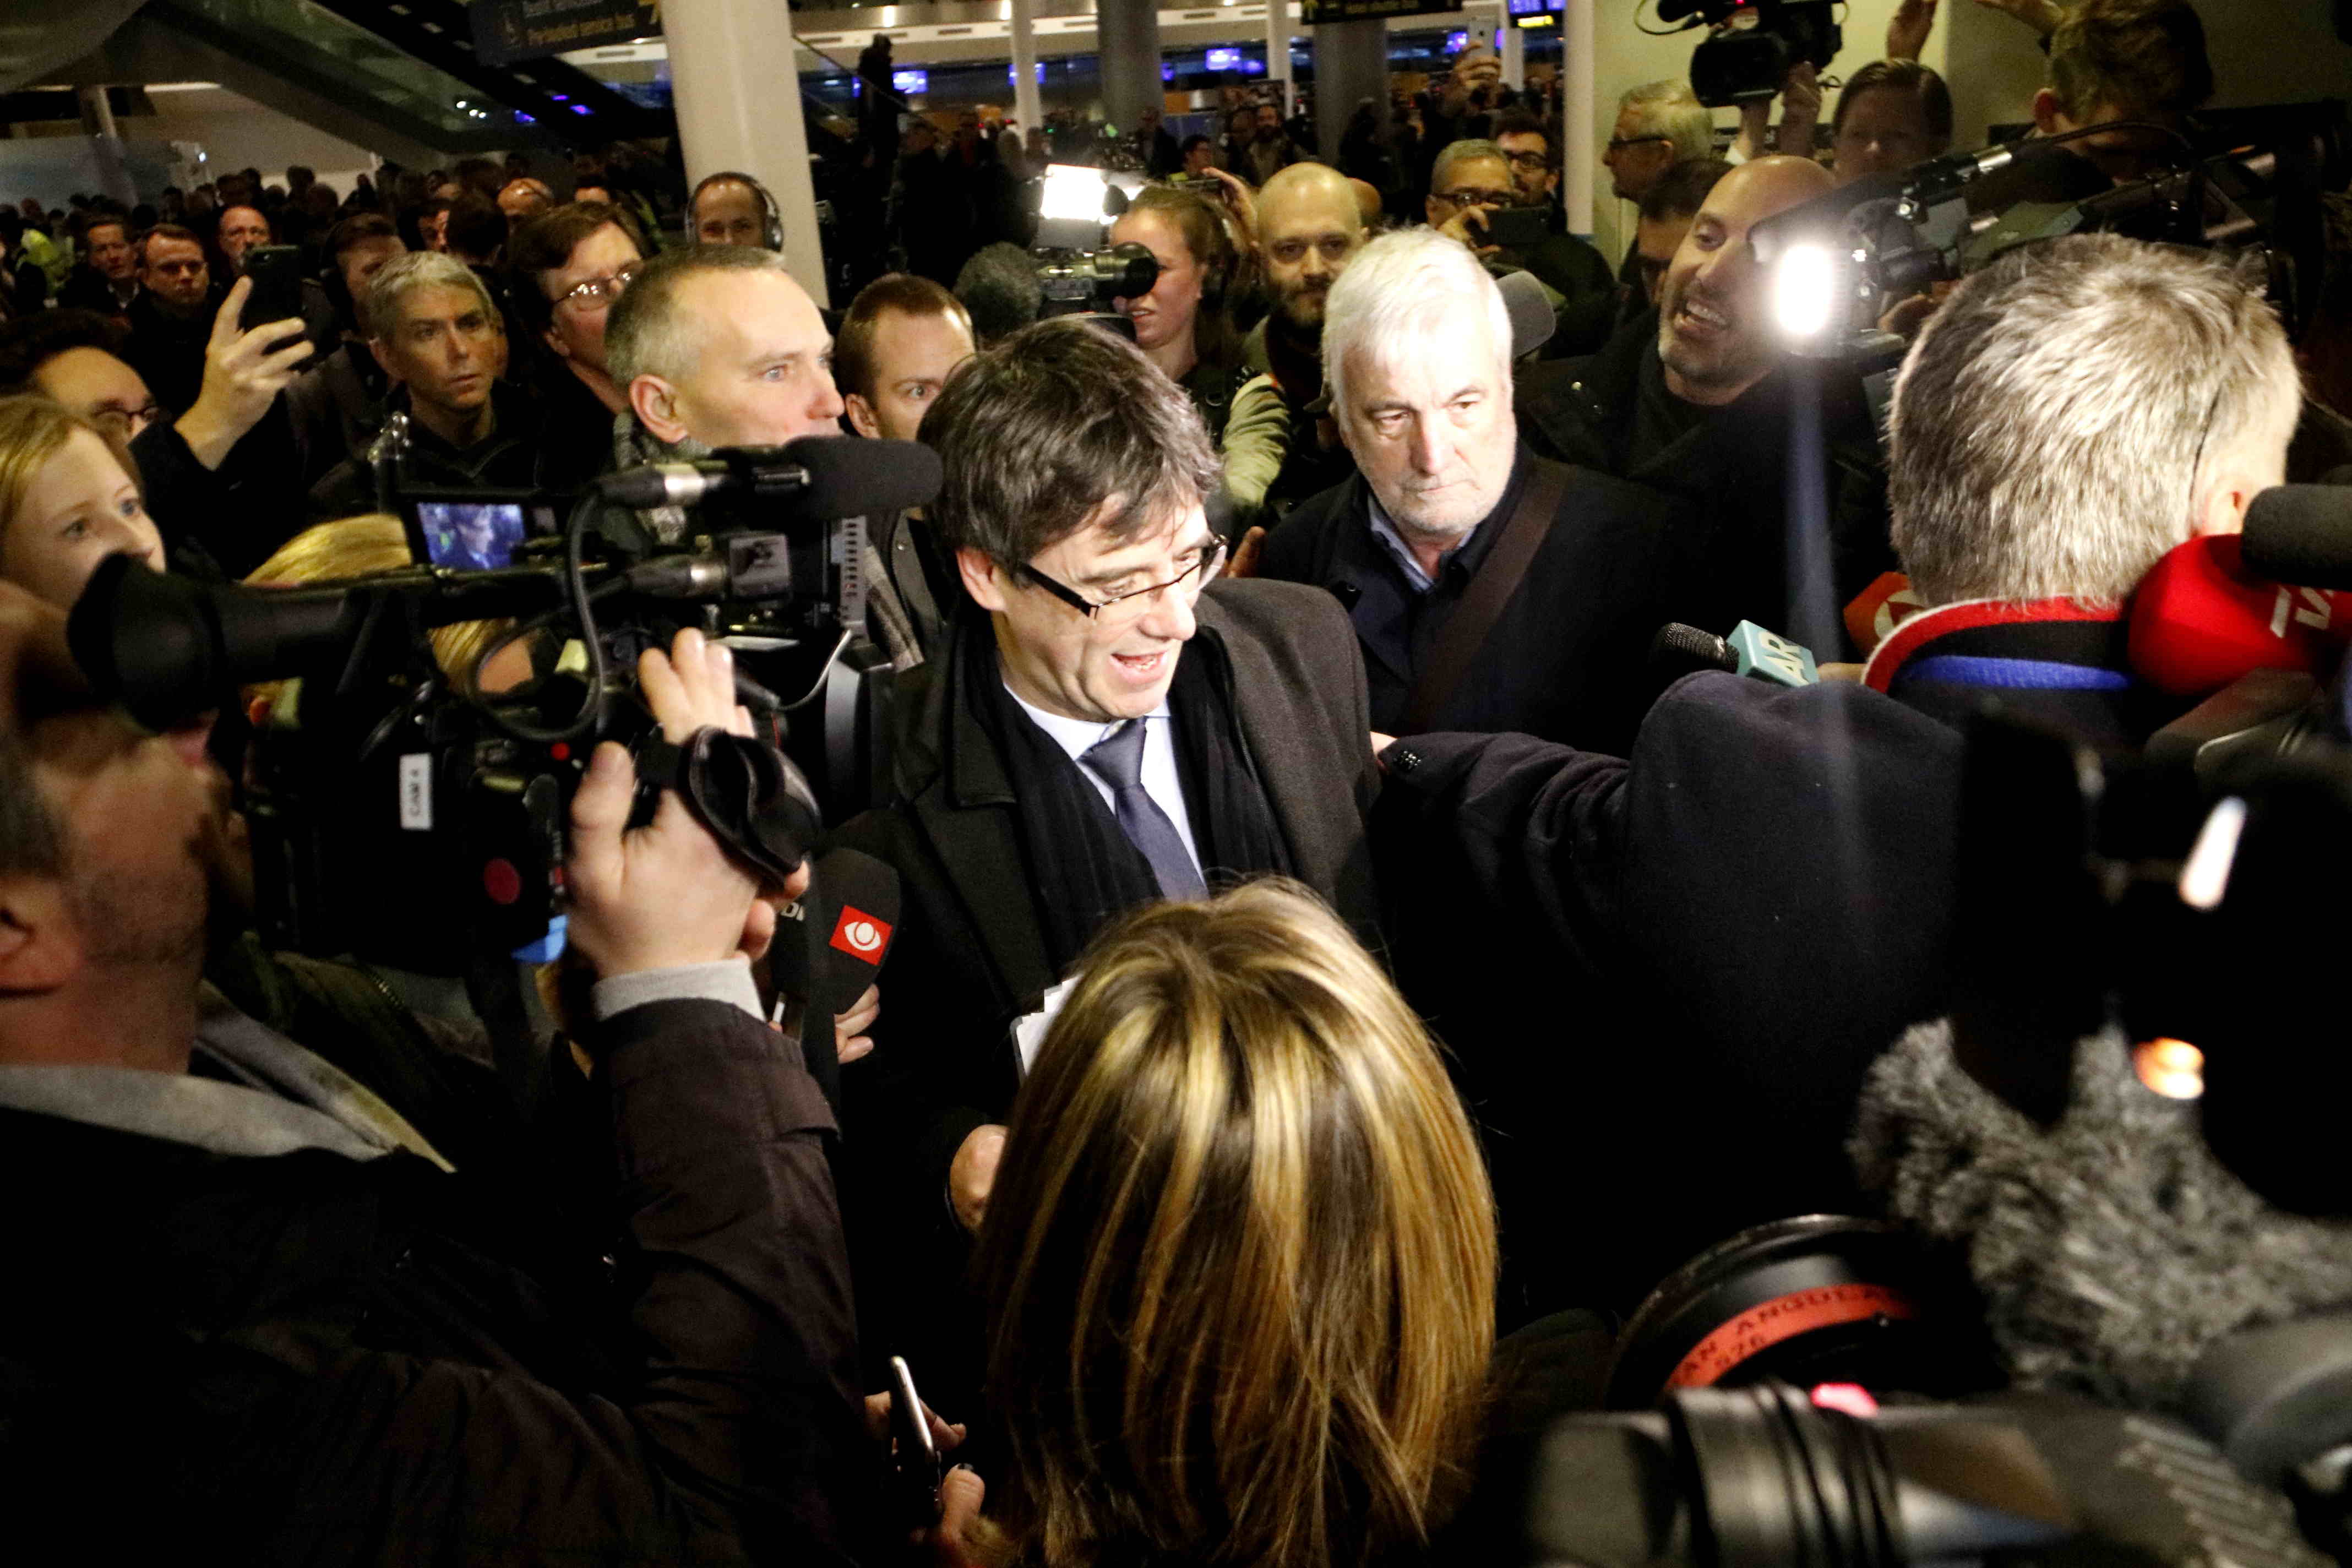 Carles Puigdemont arrives in Copenhagen with his traveling companions (by Rafa Garrido)